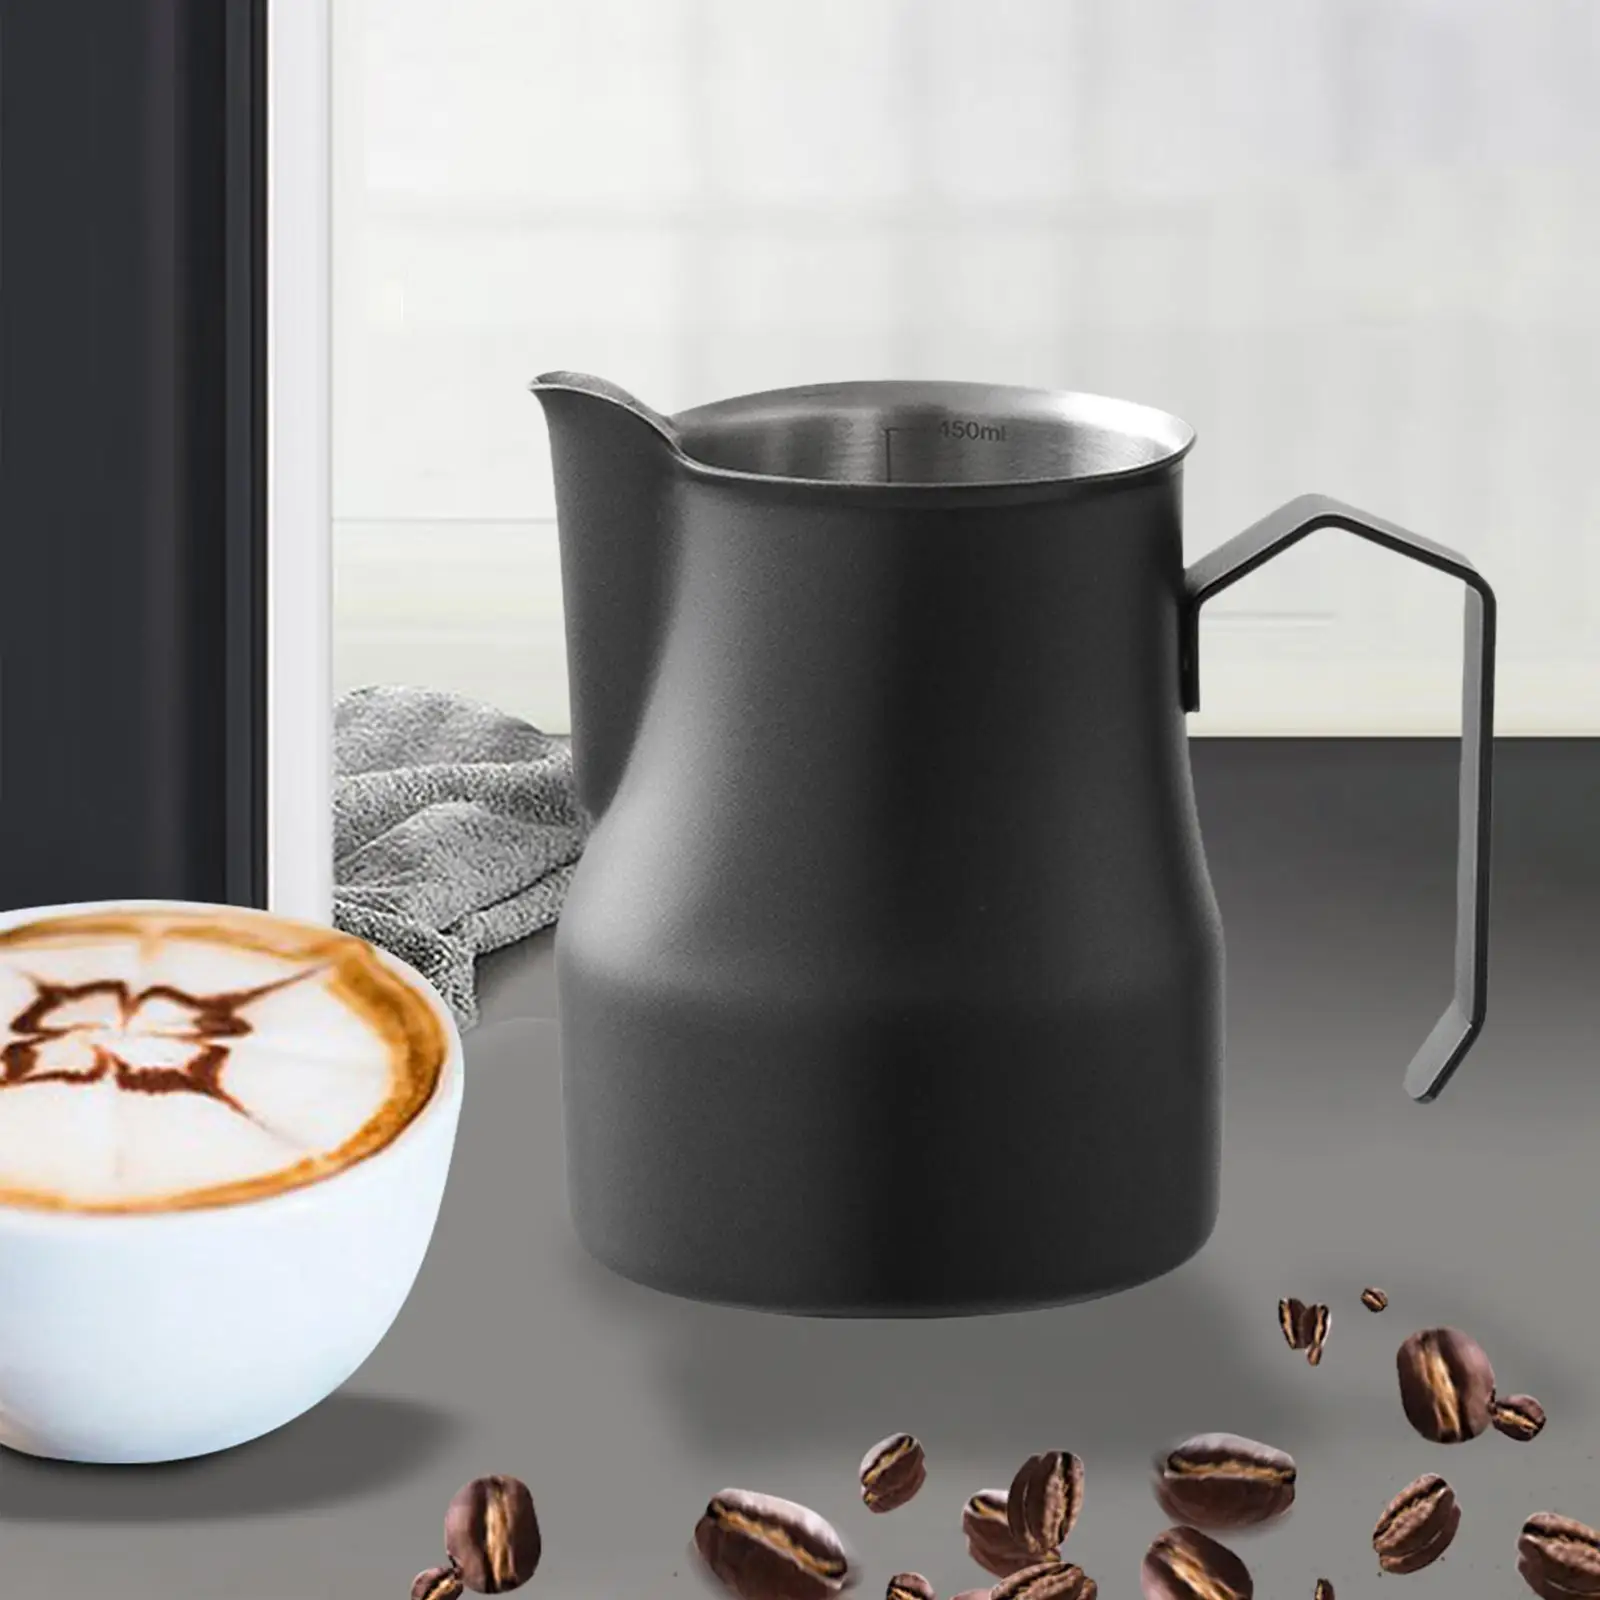 Milk Frothing Pitcher Stainless Steel Creamer Frothing Pitcher Espresso Steaming Pitcher for Lattes Cappuccino coffee